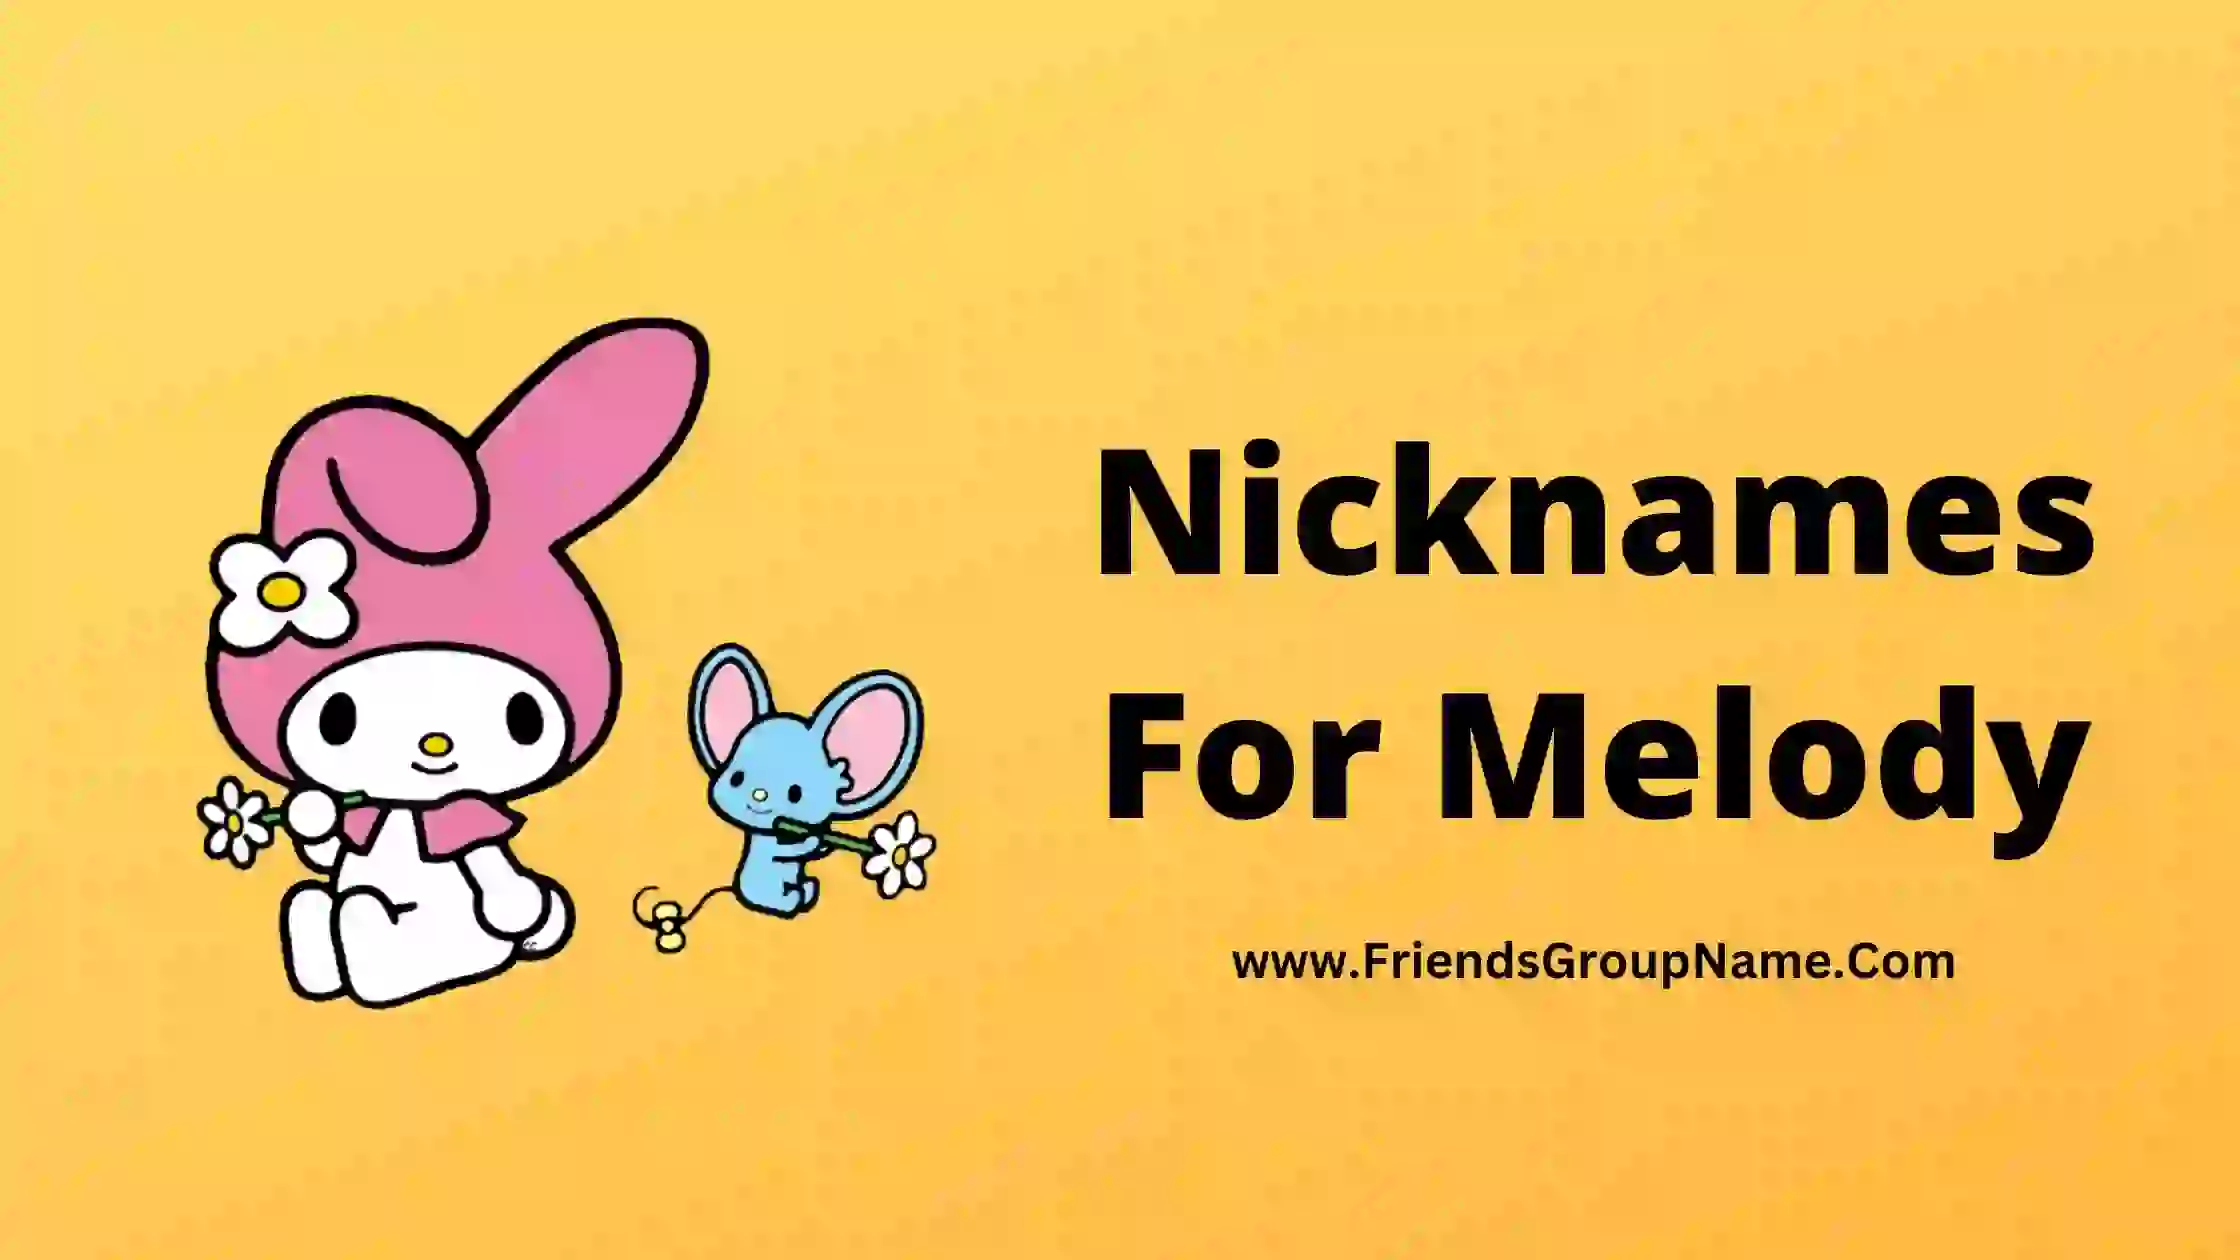 Nicknames For Melody